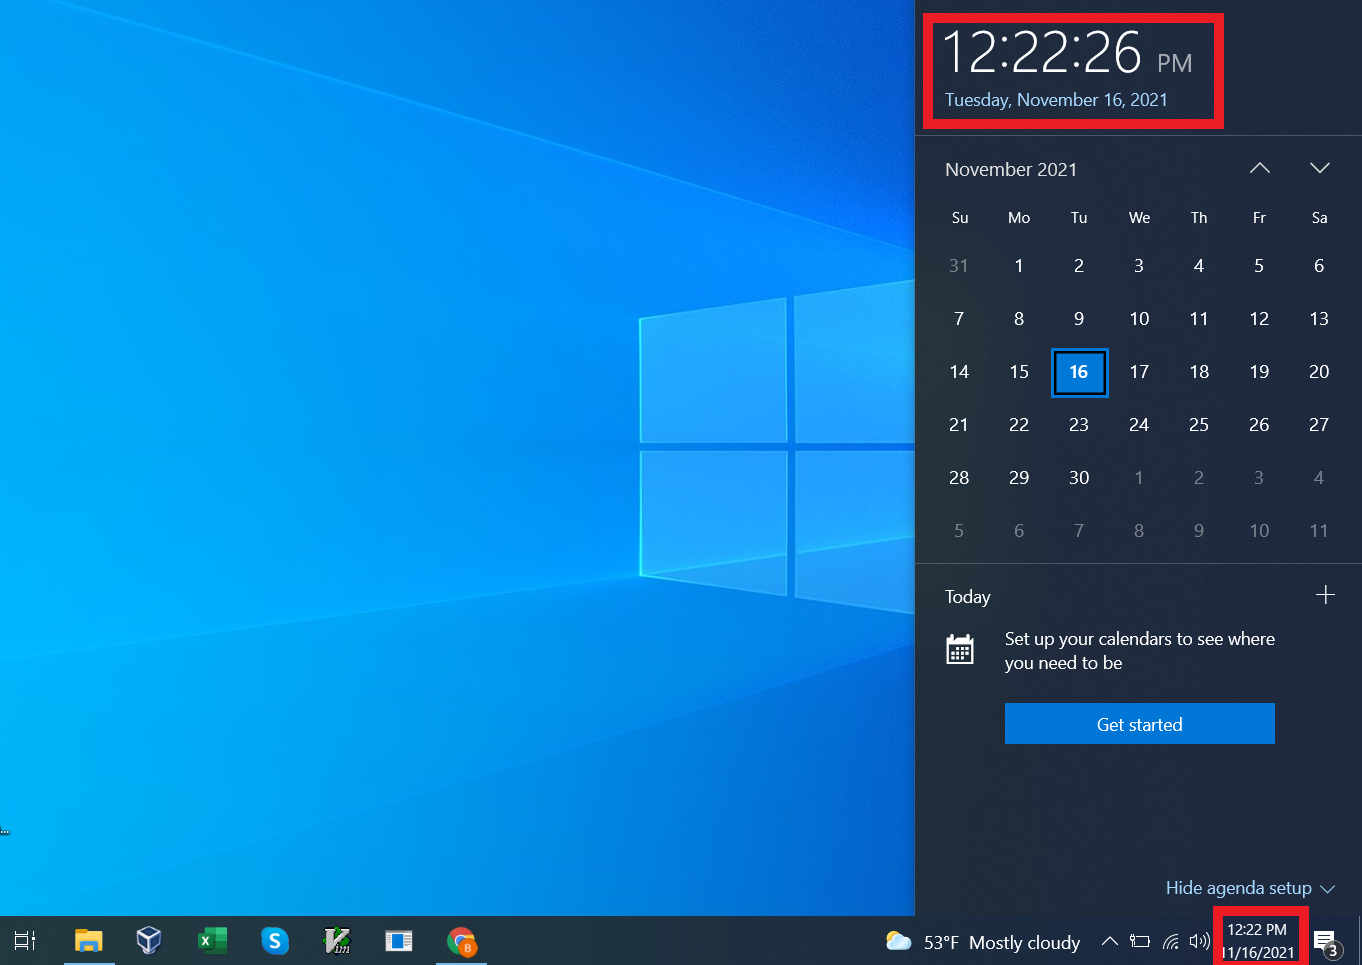 The Windows date and time widget can be found in the bottom-right corner of your Windows 10 desktop on the task bar.